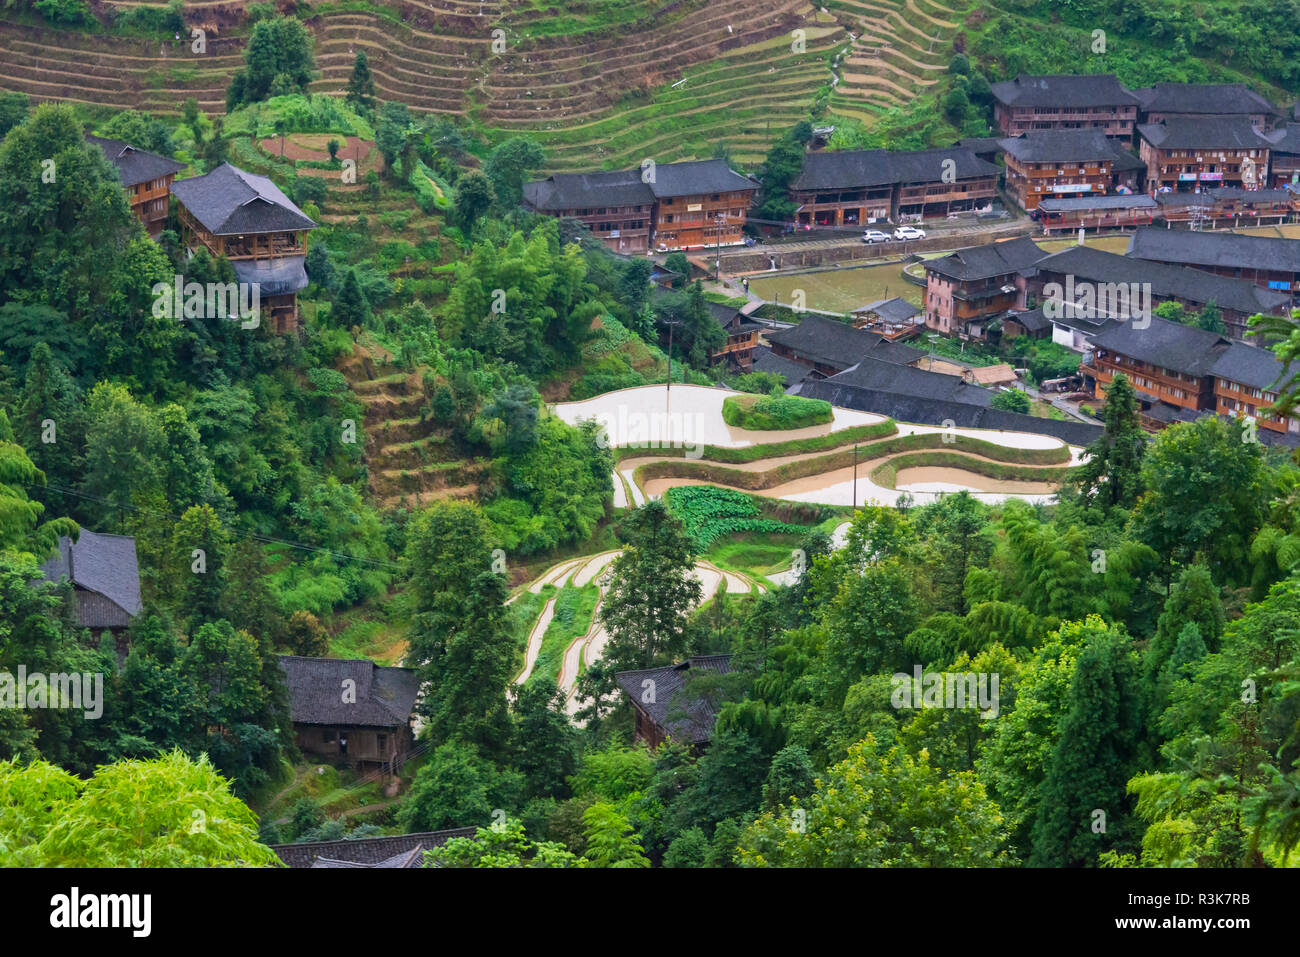 Village houses and rice terraces in the mountain, Dazhai, Guangxi Province, China Stock Photo